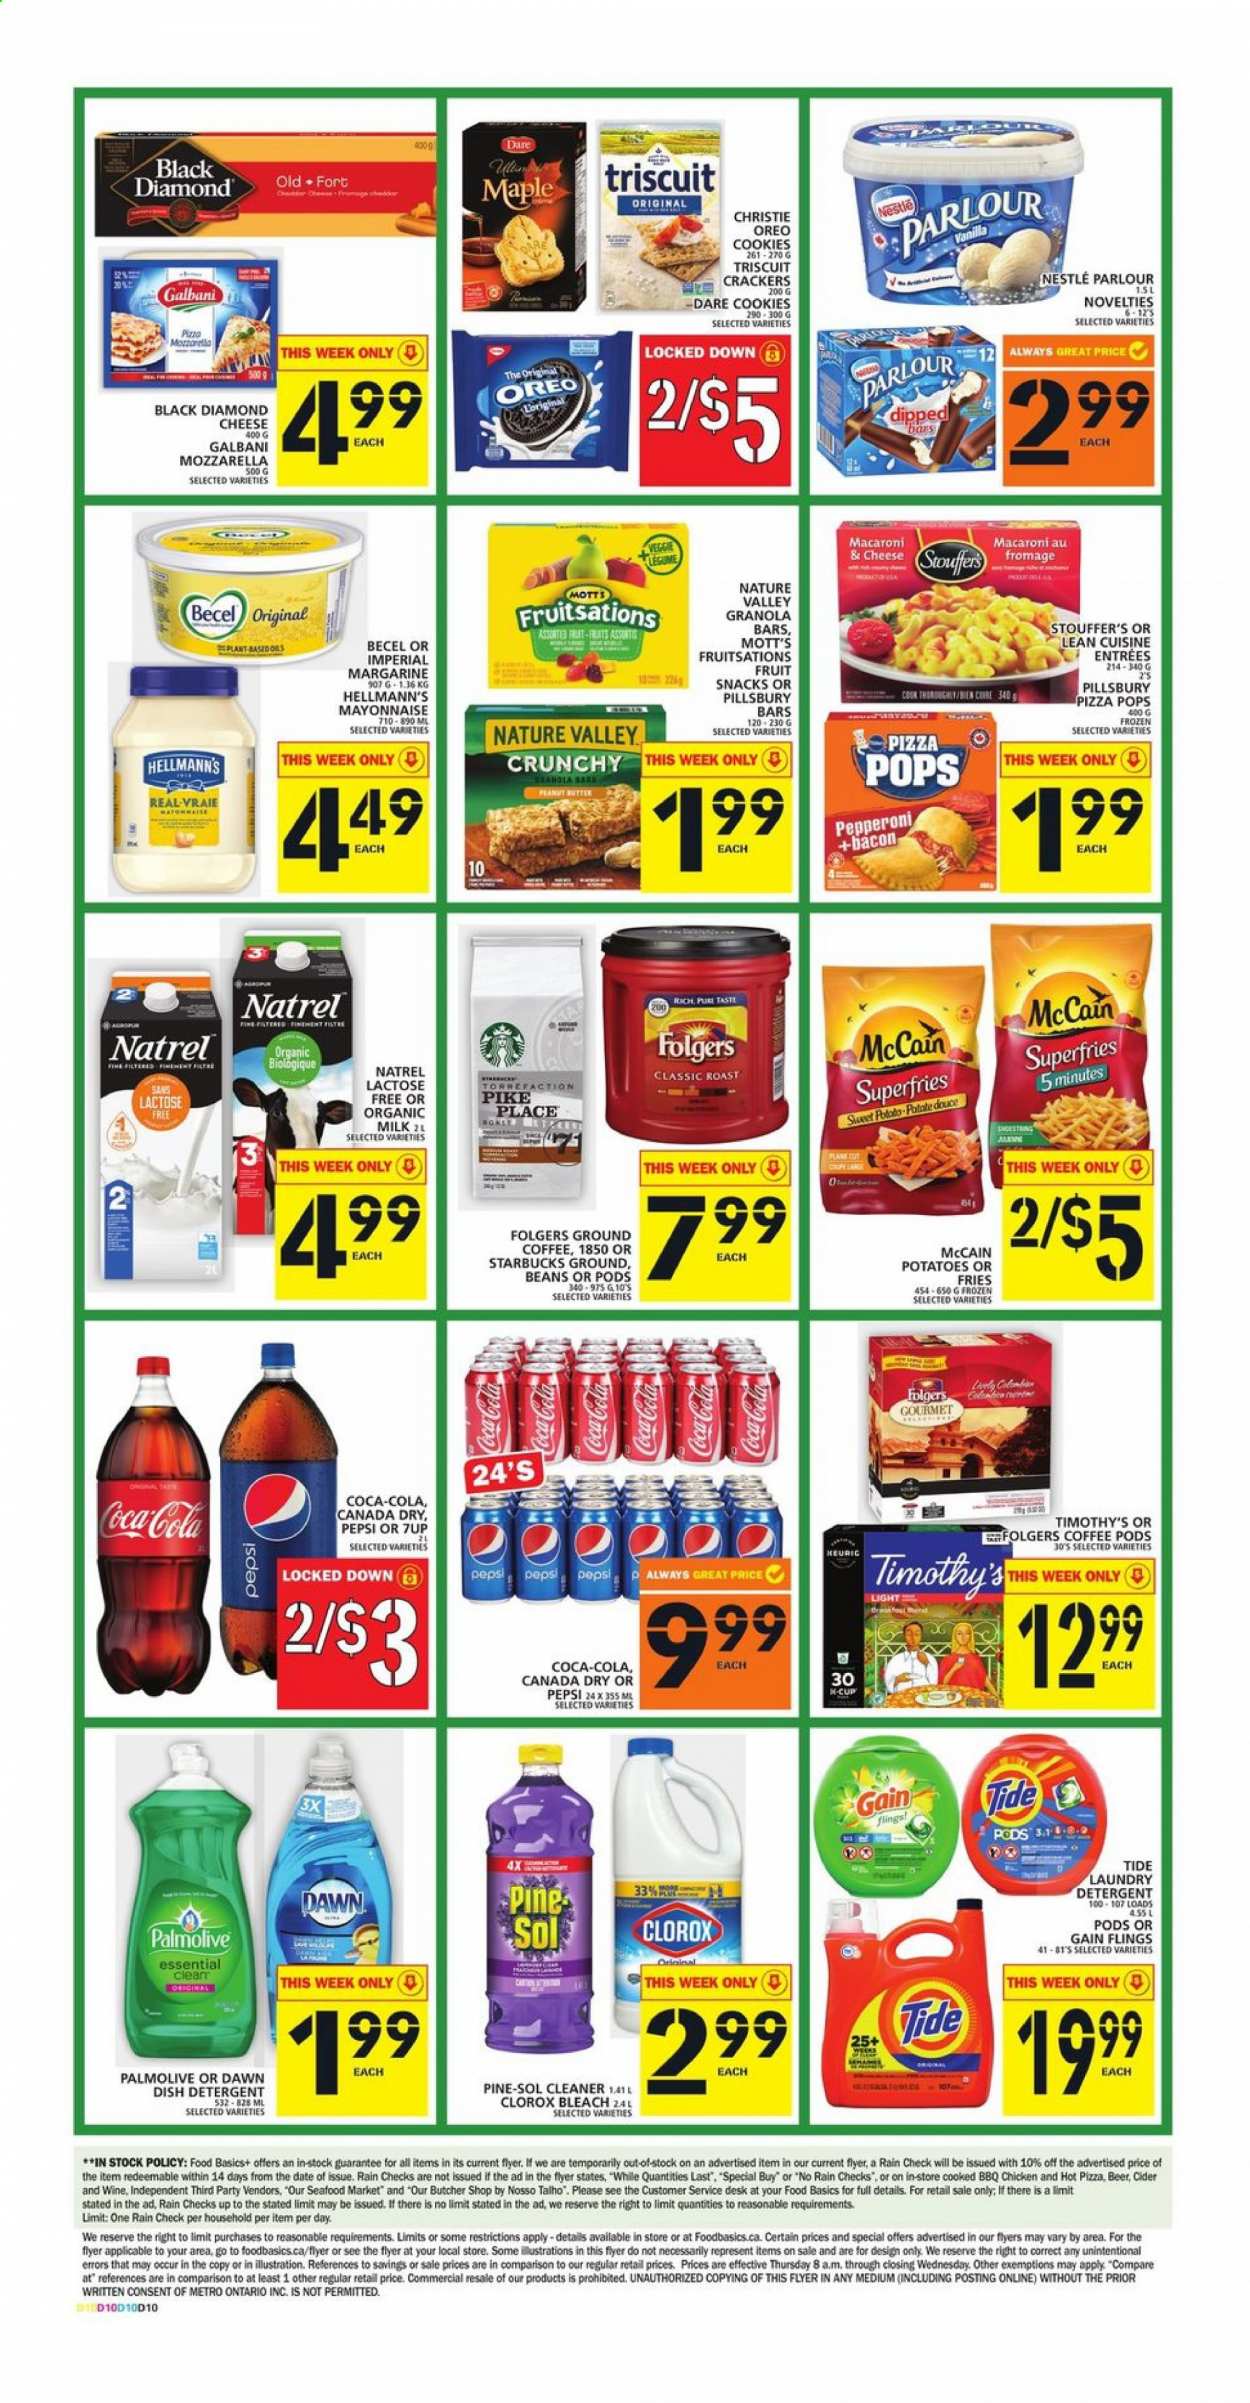 thumbnail - Food Basics Flyer - August 05, 2021 - August 11, 2021 - Sales products - potatoes, Mott's, seafood, macaroni & cheese, pizza, Pillsbury, Lean Cuisine, bacon, Galbani, Oreo, organic milk, margarine, mayonnaise, Hellmann’s, Stouffer's, McCain, potato fries, cookies, crackers, fruit snack, granola bar, Nature Valley, Canada Dry, Coca-Cola, Pepsi, 7UP, coffee pods, Folgers, ground coffee, coffee capsules, Starbucks, K-Cups, wine, cider, beer, Gain, cleaner, bleach, Clorox, Pine-Sol, Tide, Palmolive, Nestlé. Page 5.